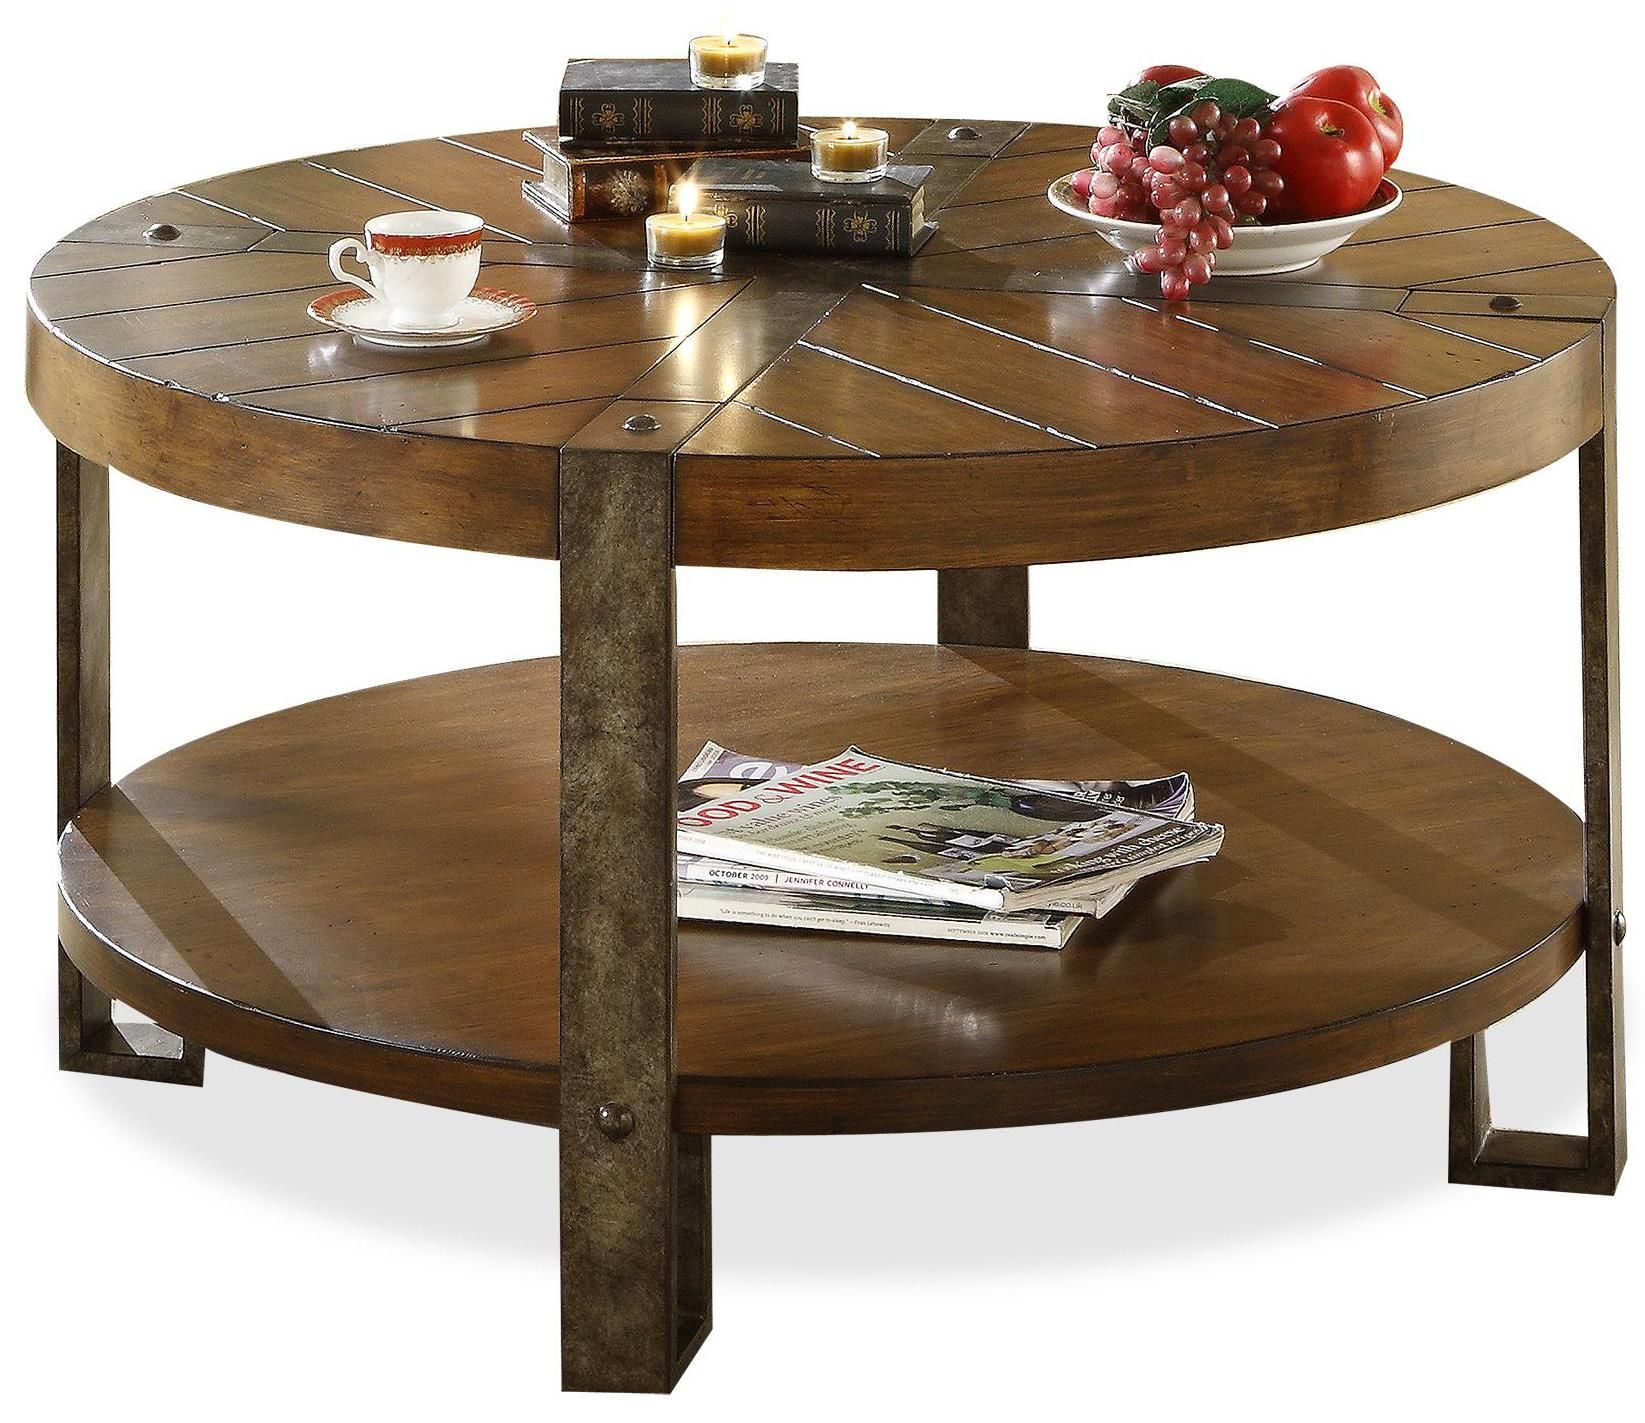 Awesome Round Coffee Tables With Storage | Homesfeed For Coffee Tables For 4 6 People (View 9 of 20)